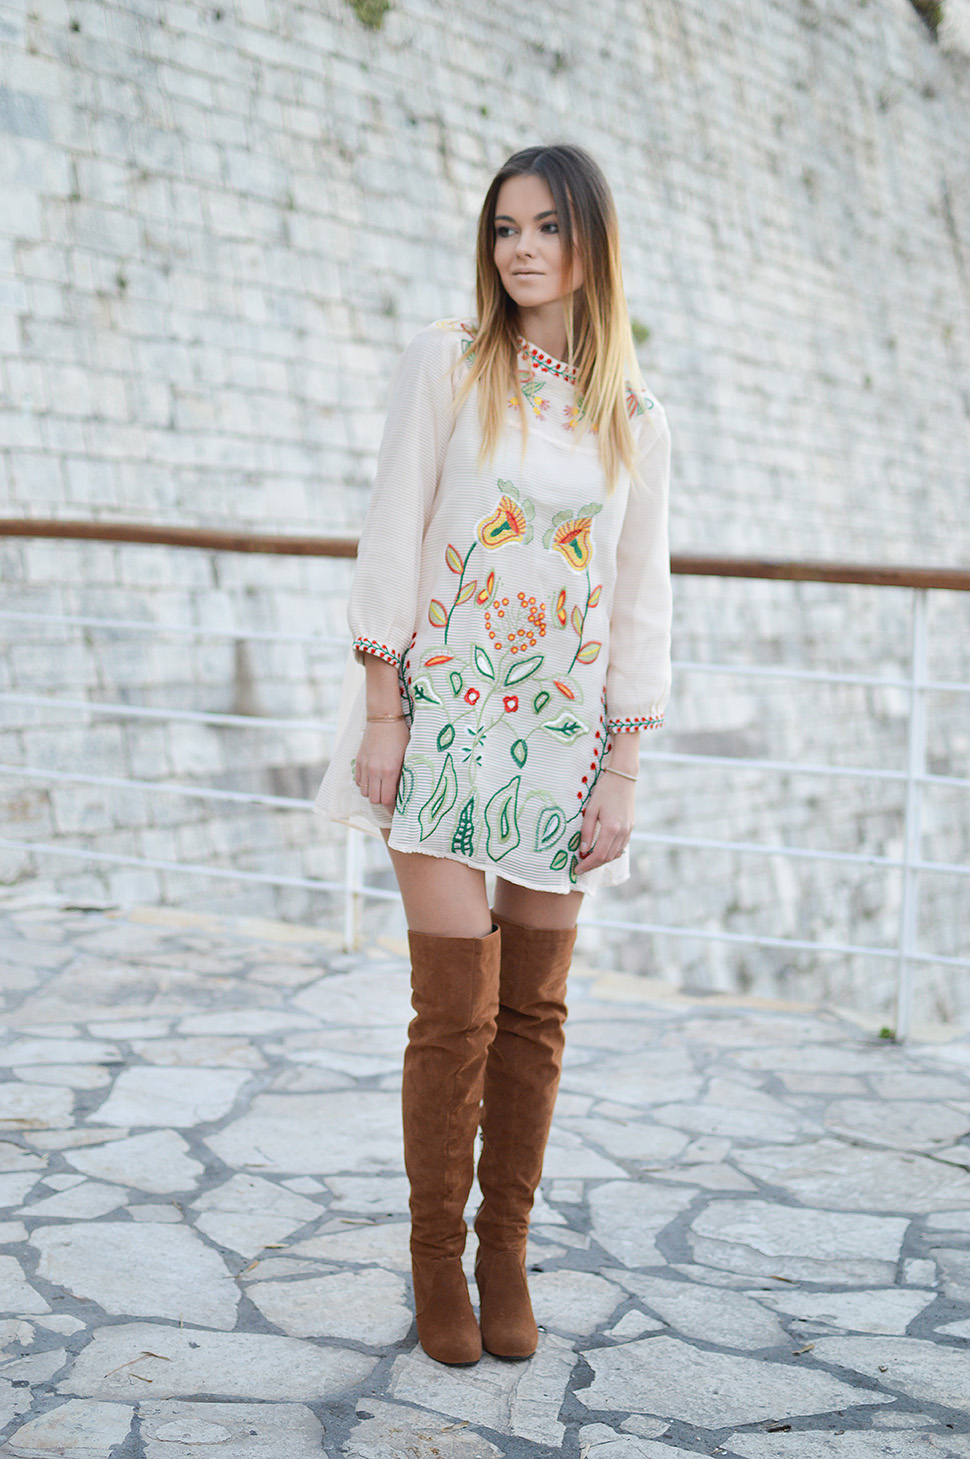 Perfect Date Outfit by Tamara Bellis